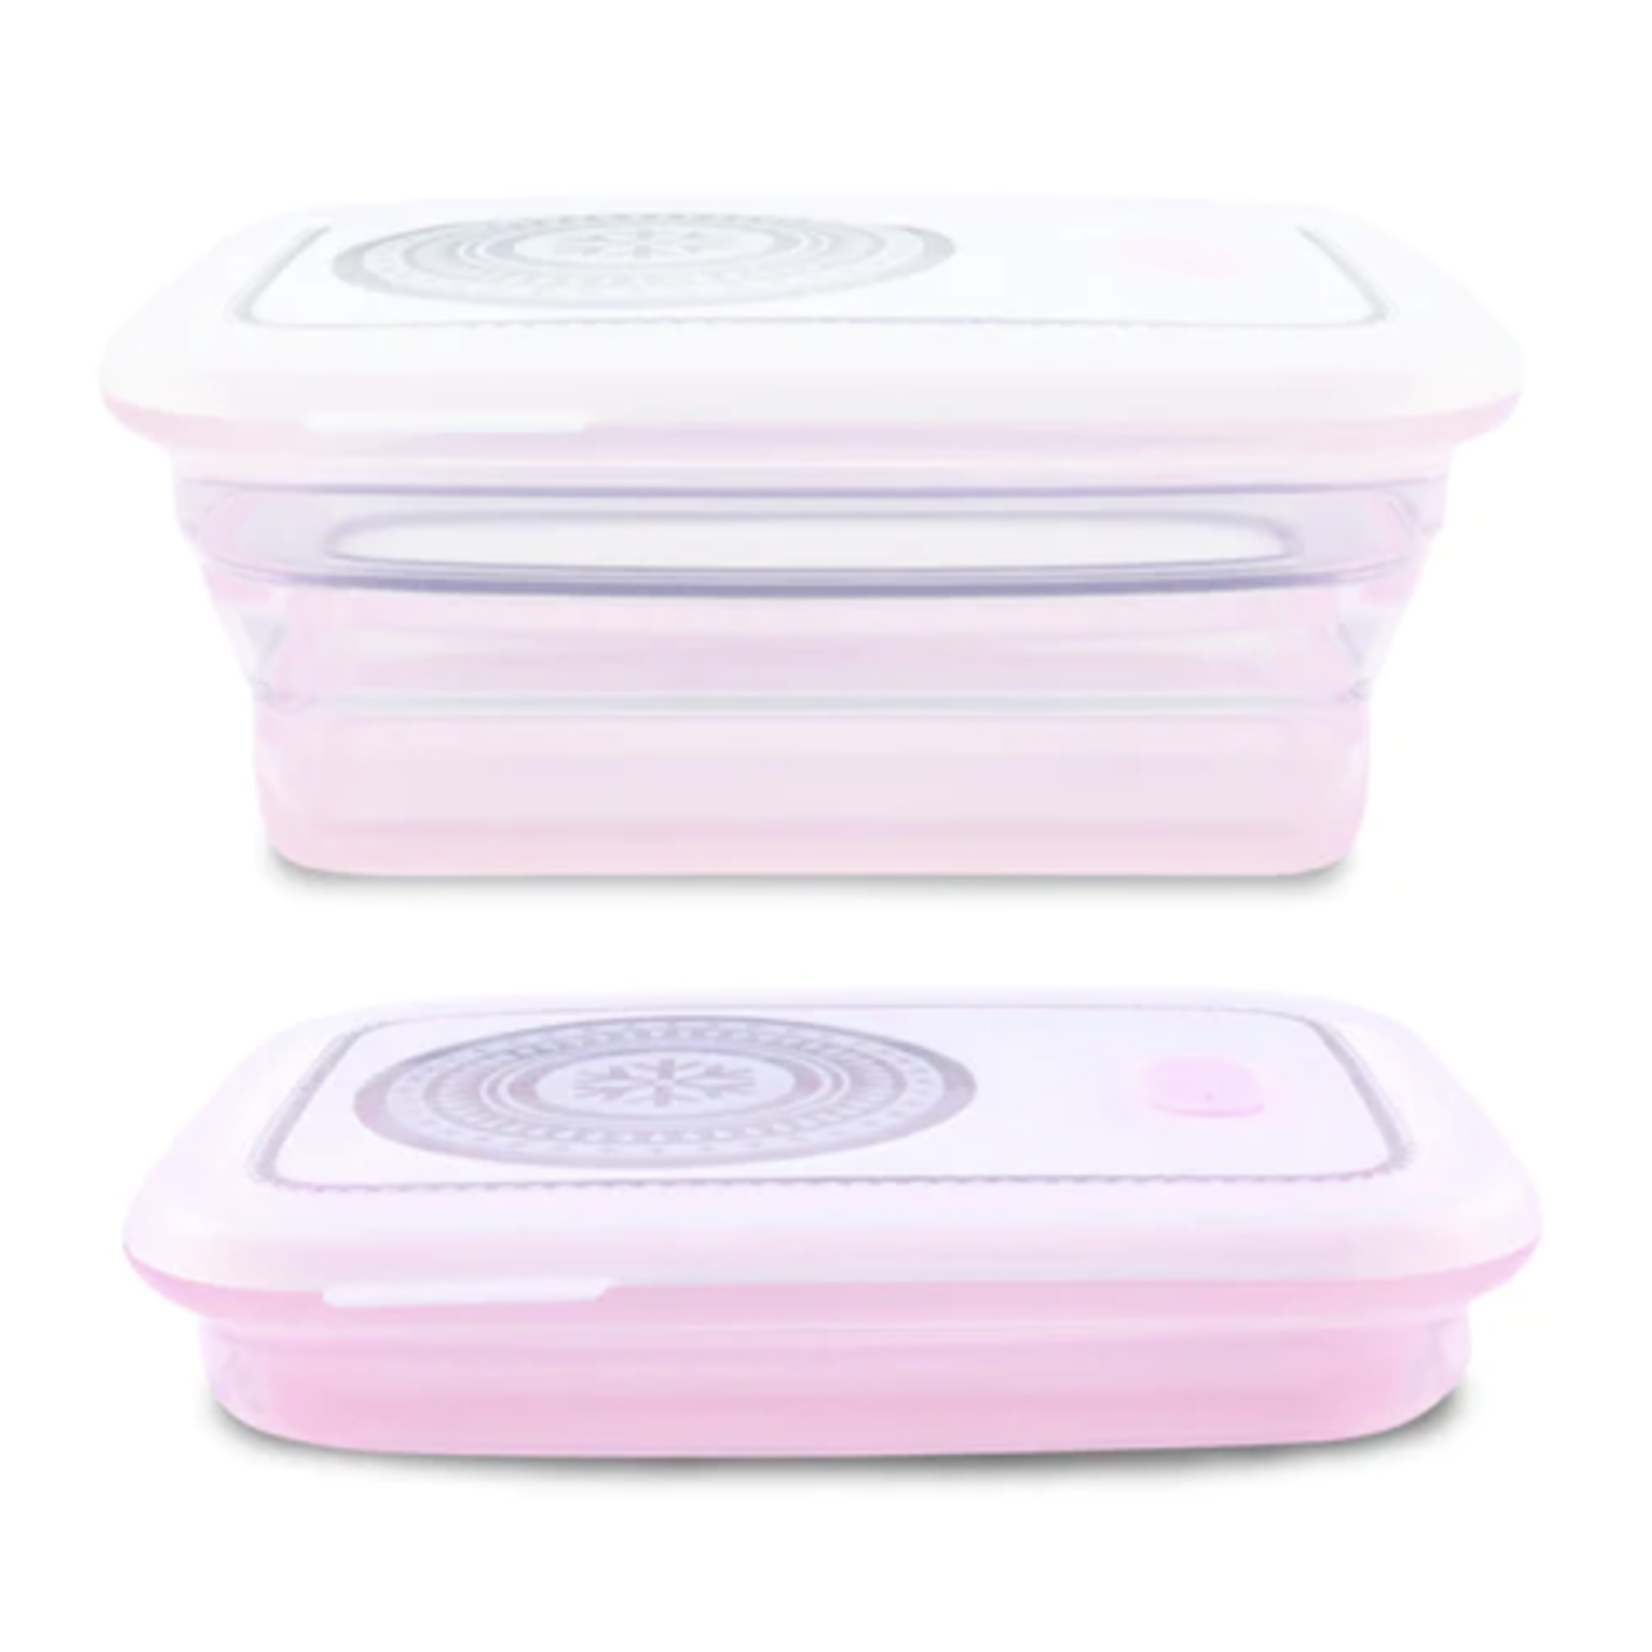 Haakaa Silicone Collapsible Food Storage Container New & Improved Pink 1160ml